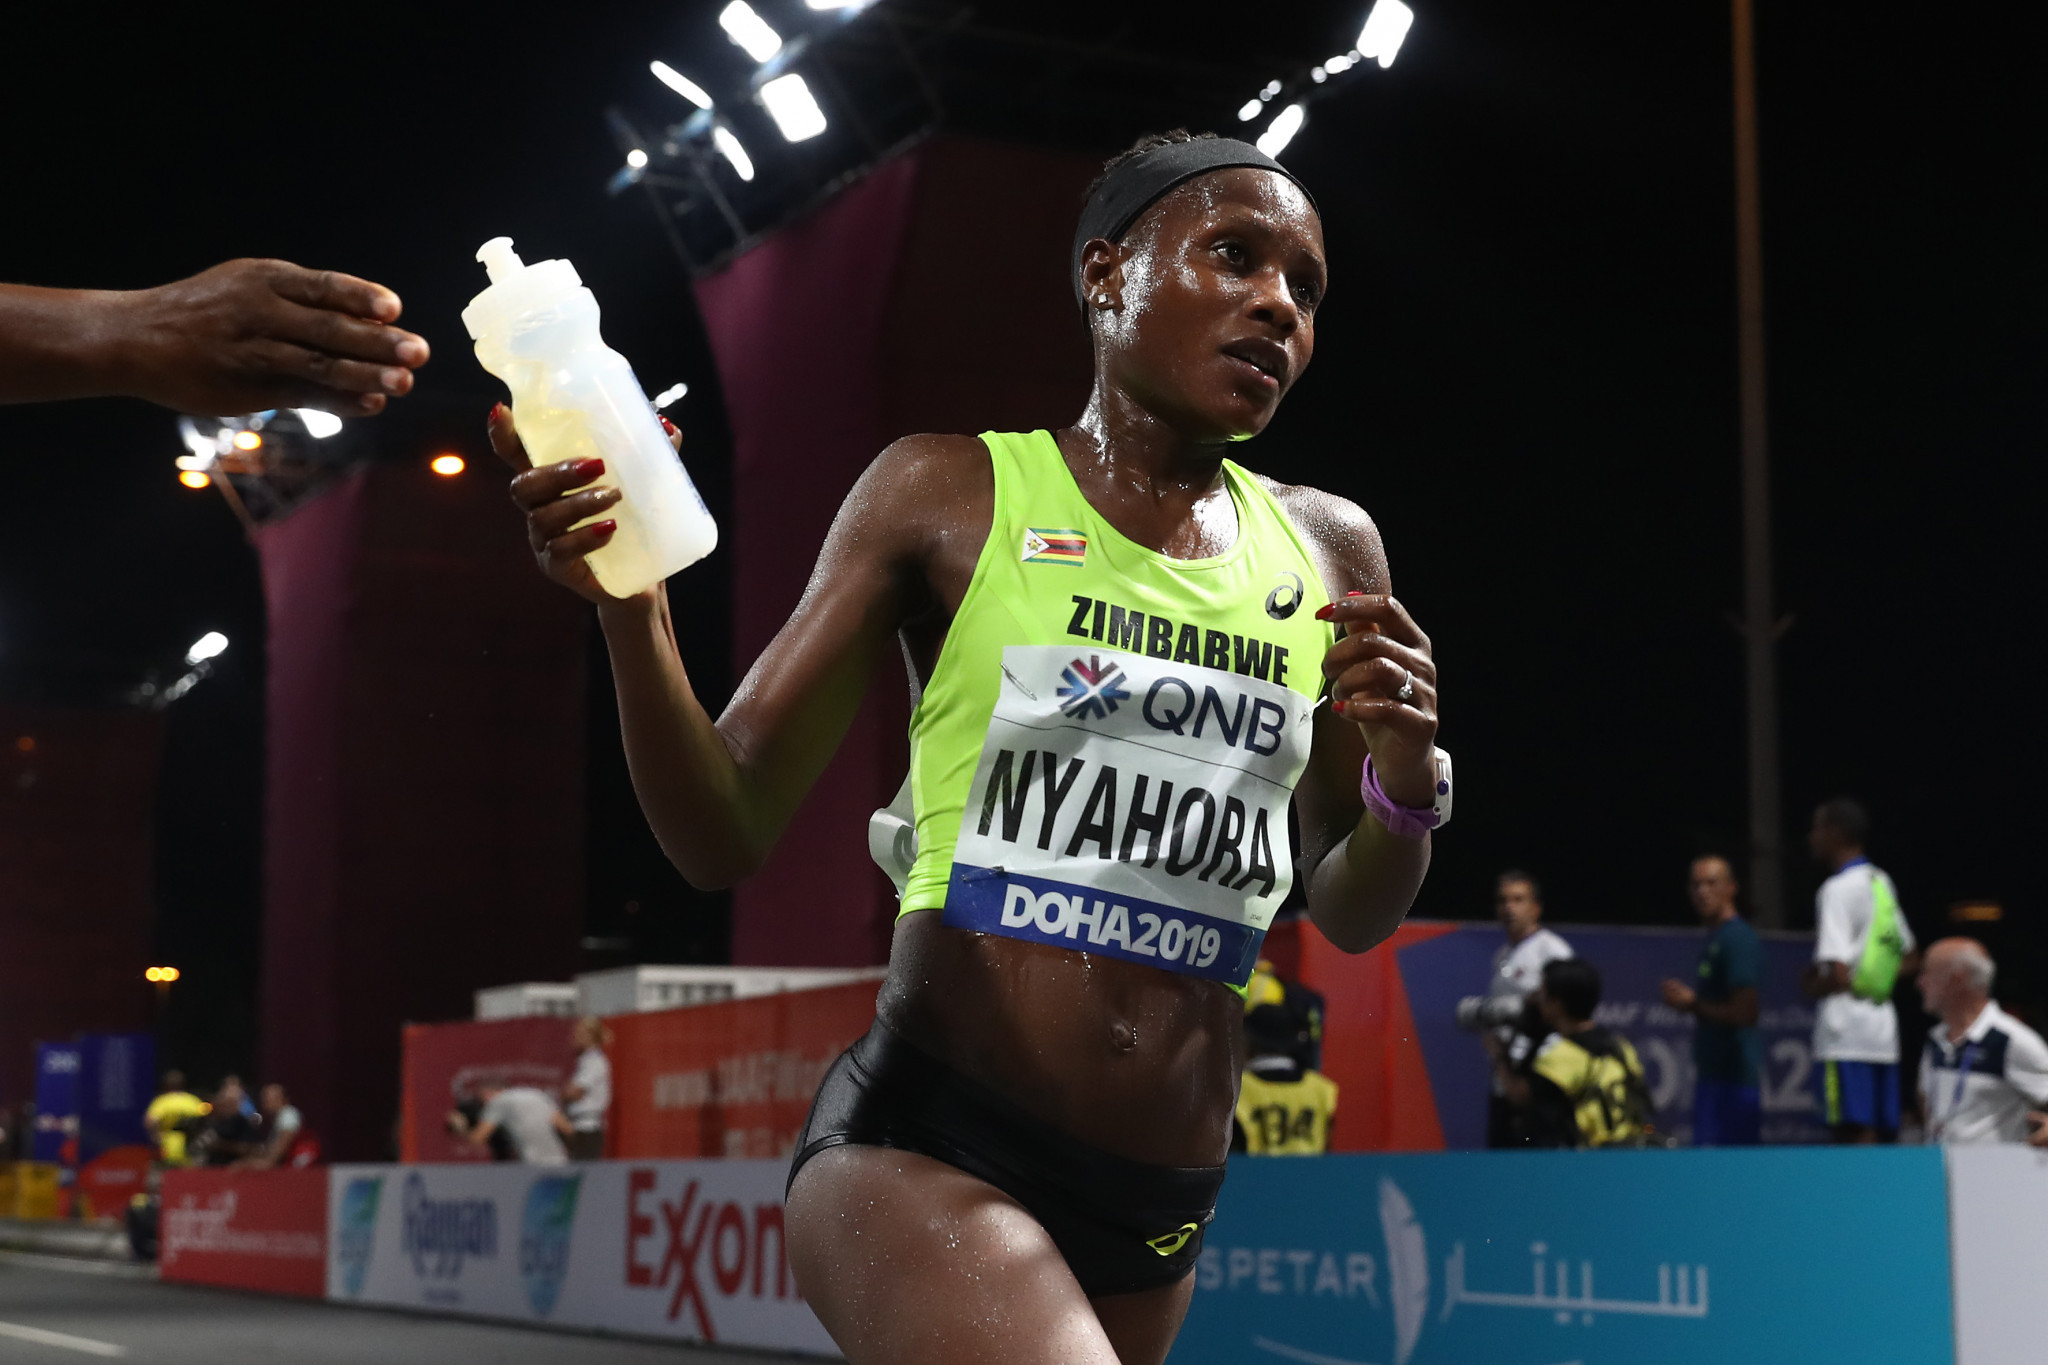 Rutendo Joan Nyahora produced Zimbabwe's best performance at this year's IAAF World Championships when she finished 21st in the women's marathon in Doha ©Getty Images